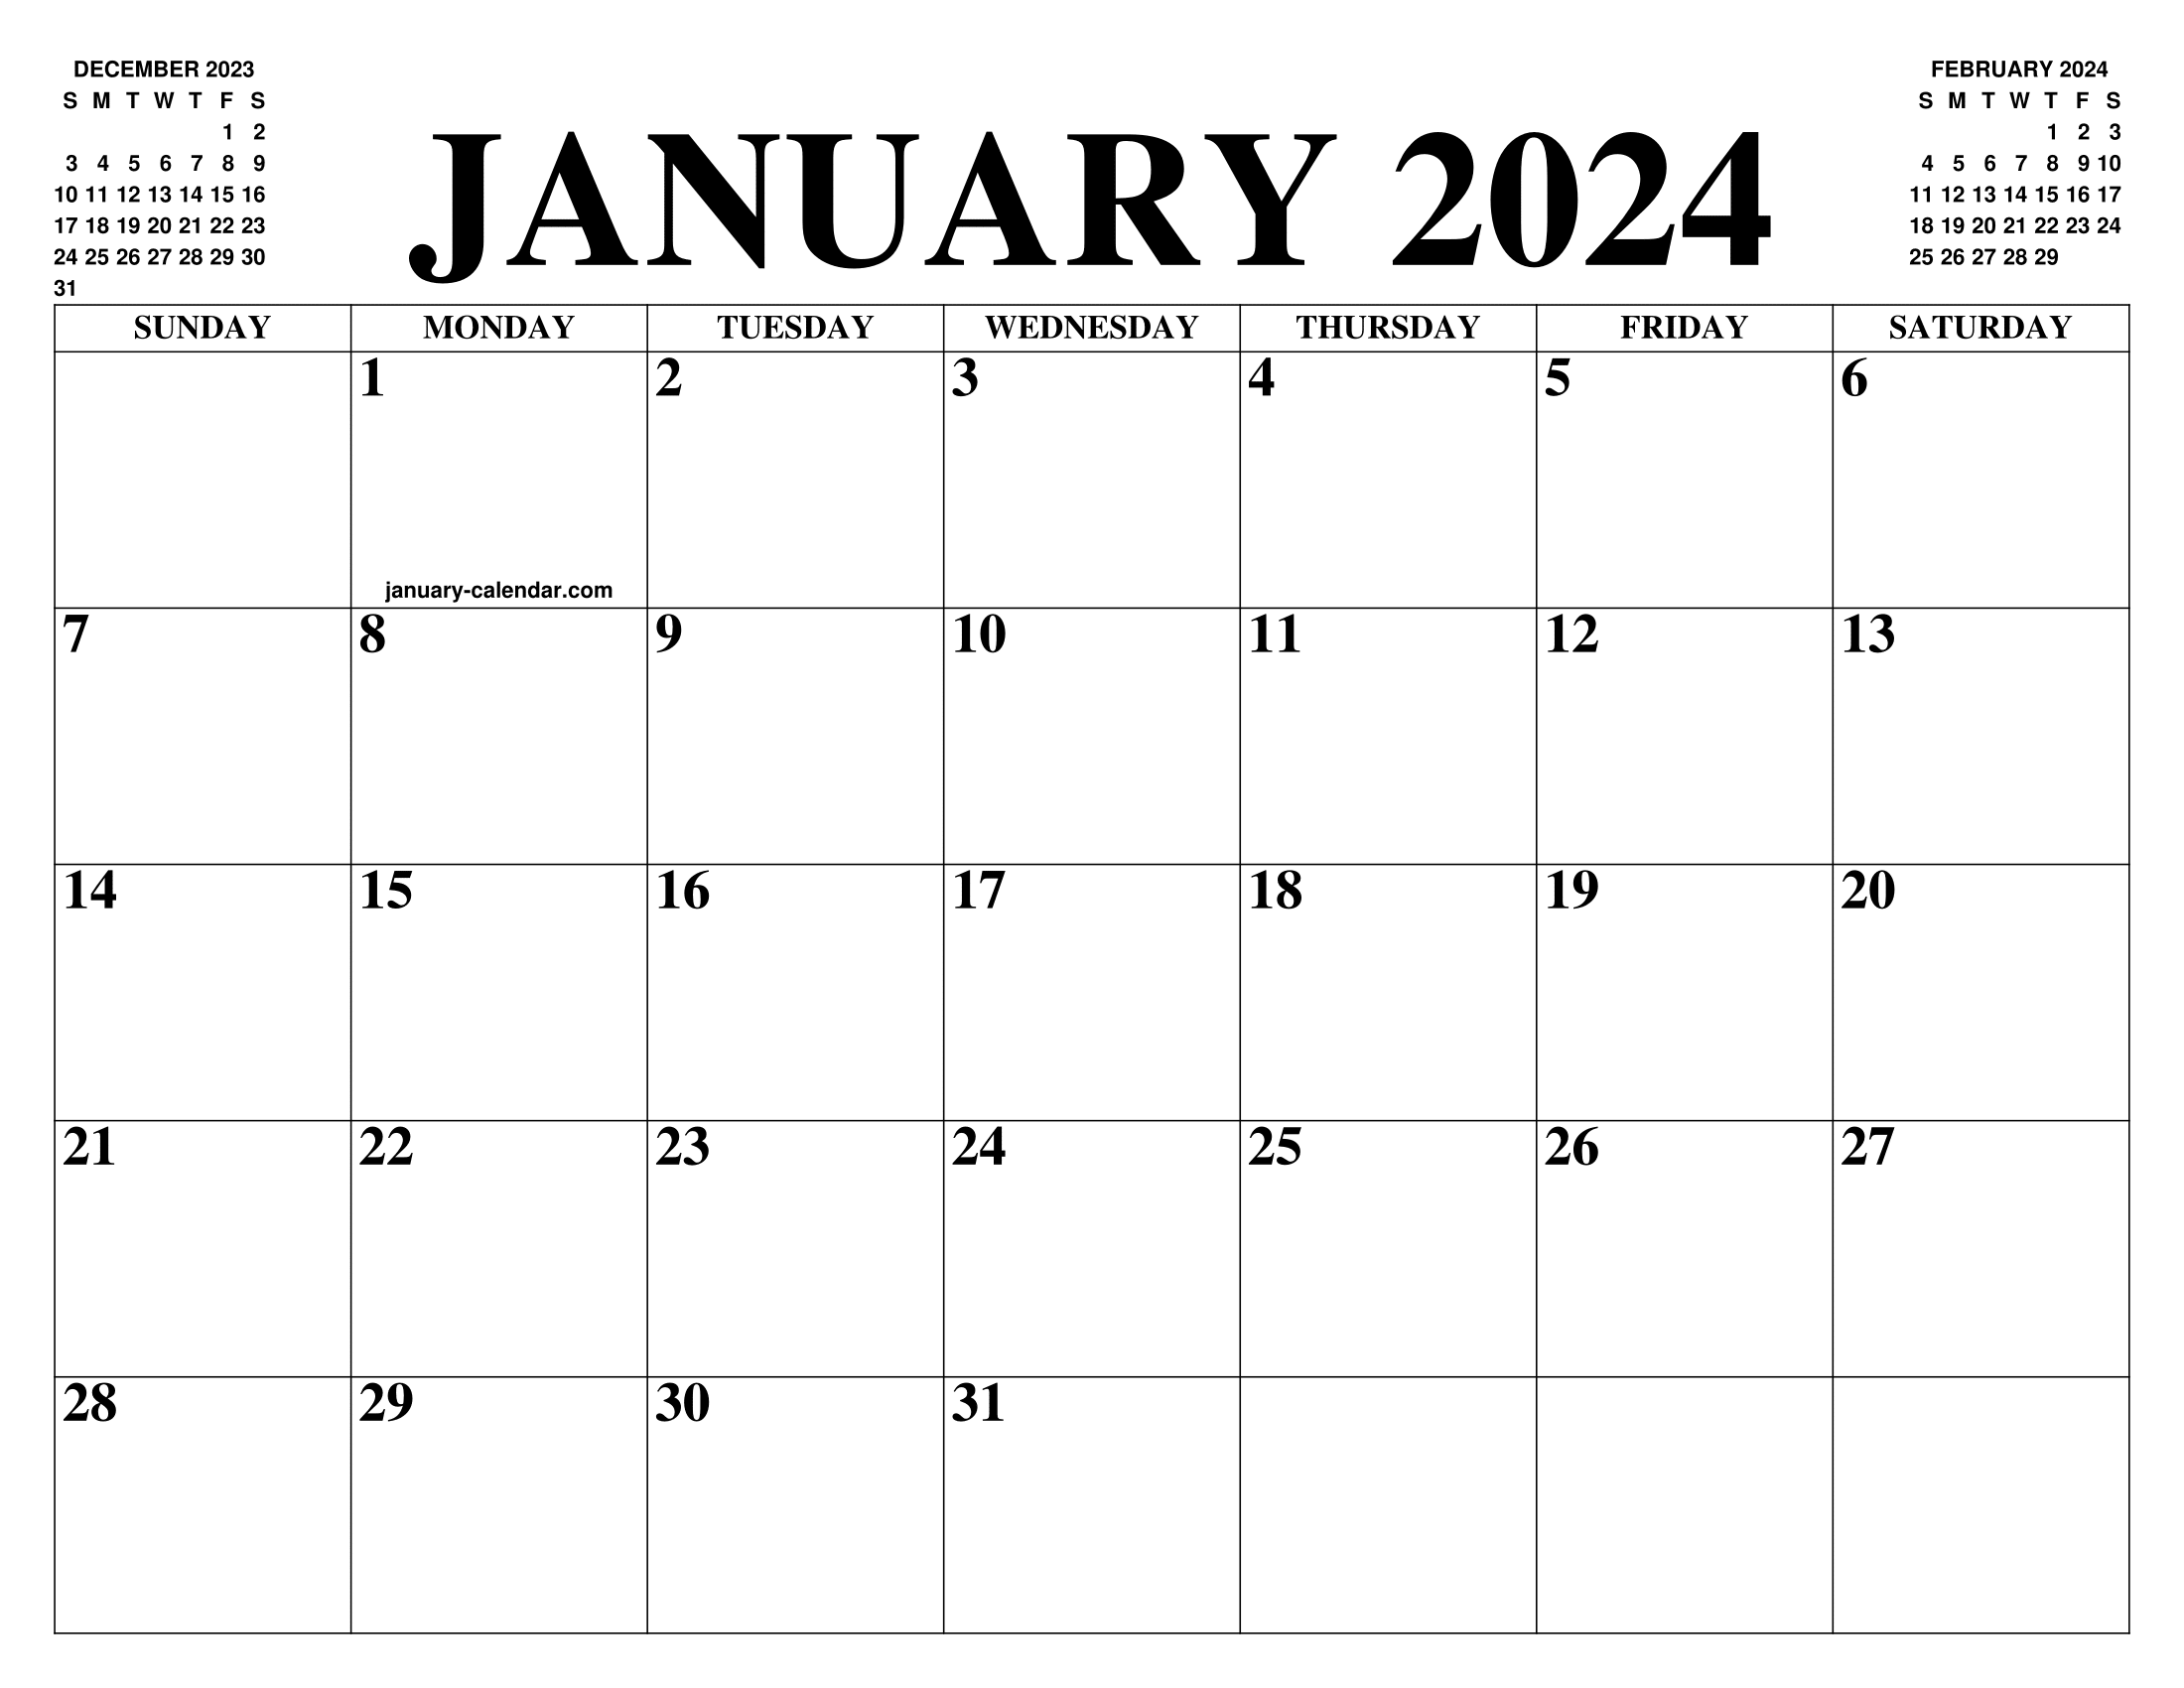 JANUARY 2024 CALENDAR OF THE MONTH FREE PRINTABLE JANUARY 2024 CALENDAR OF THE YEAR AGENDA